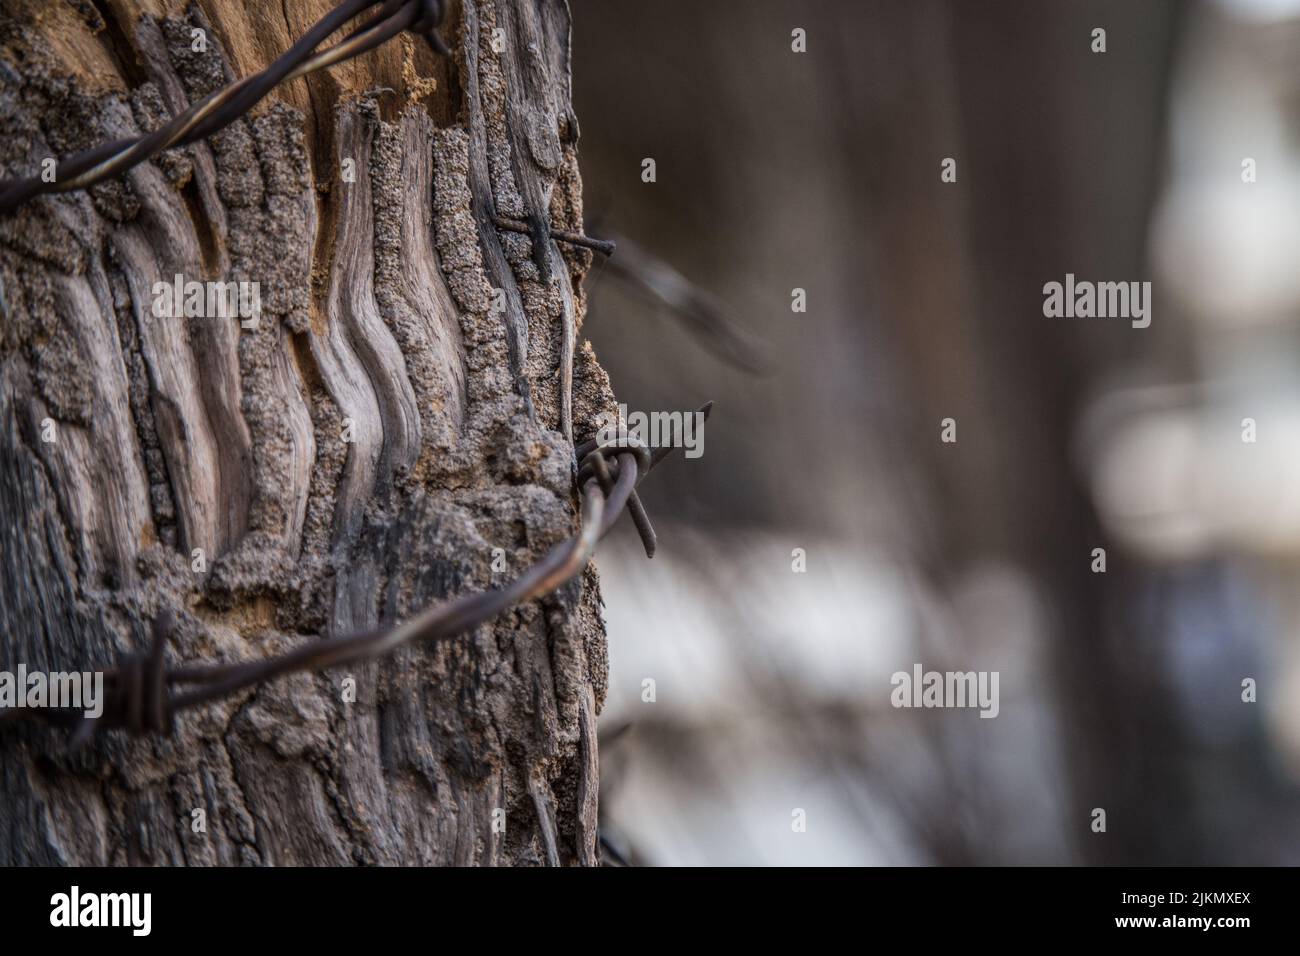 A closeup of barbed wire wrapped around a tree on a blurred background in Asia Stock Photo